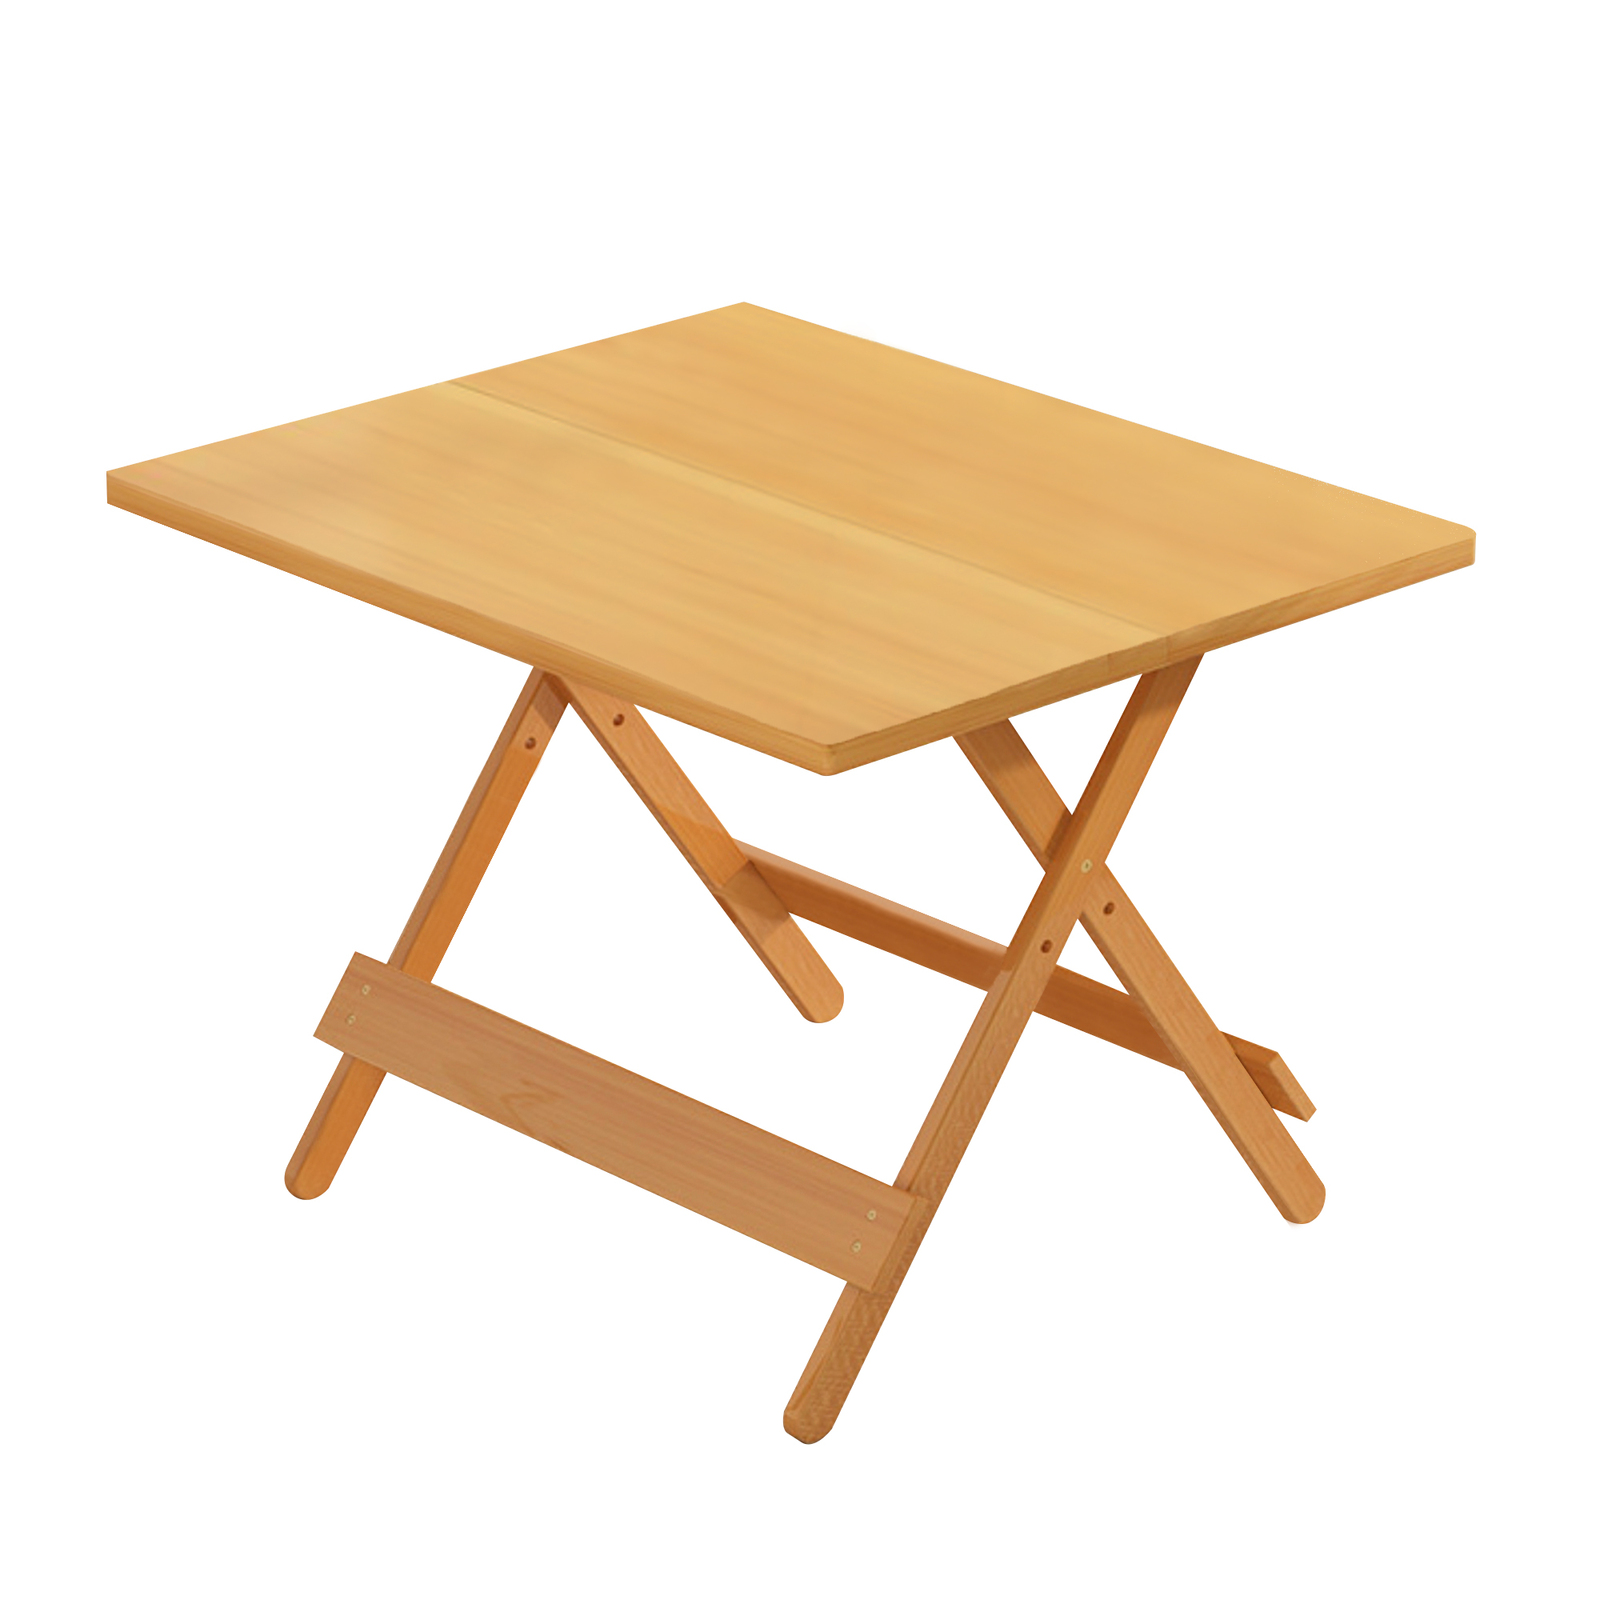 Foldable Bamboo Table Folding Desk Portable Table Dining Living Room